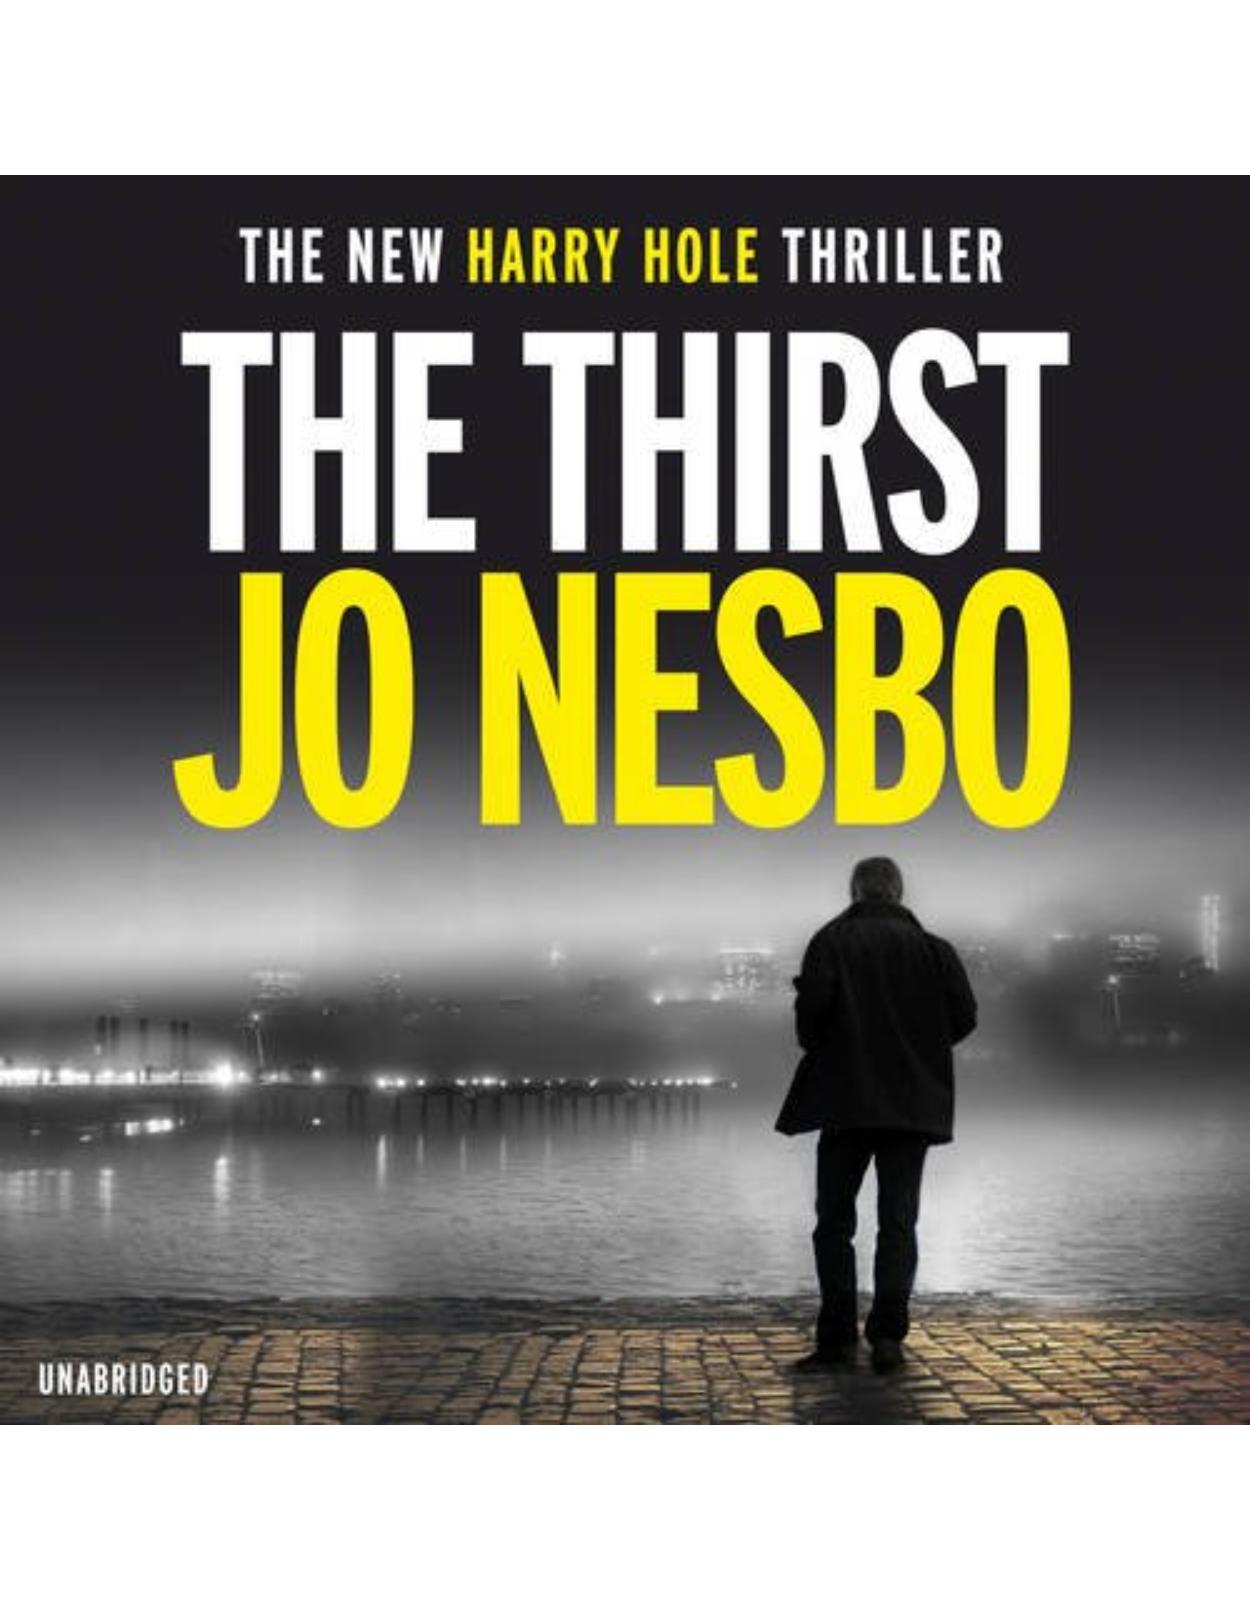 The Thirst: Harry Hole 11 